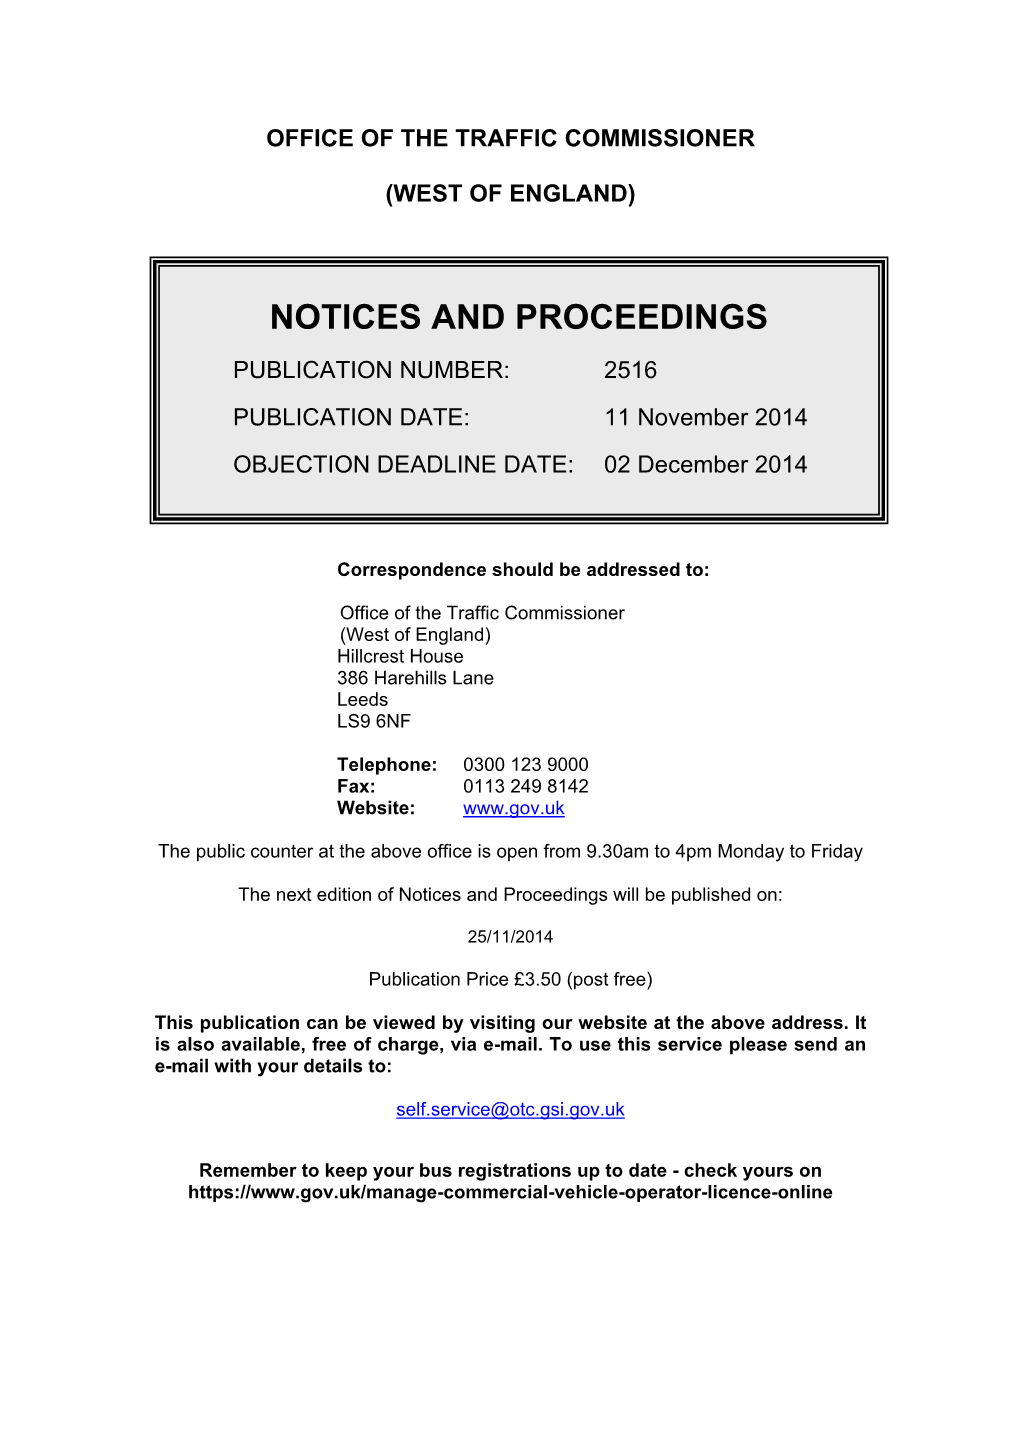 Notices and Proceedings 11 November 2014